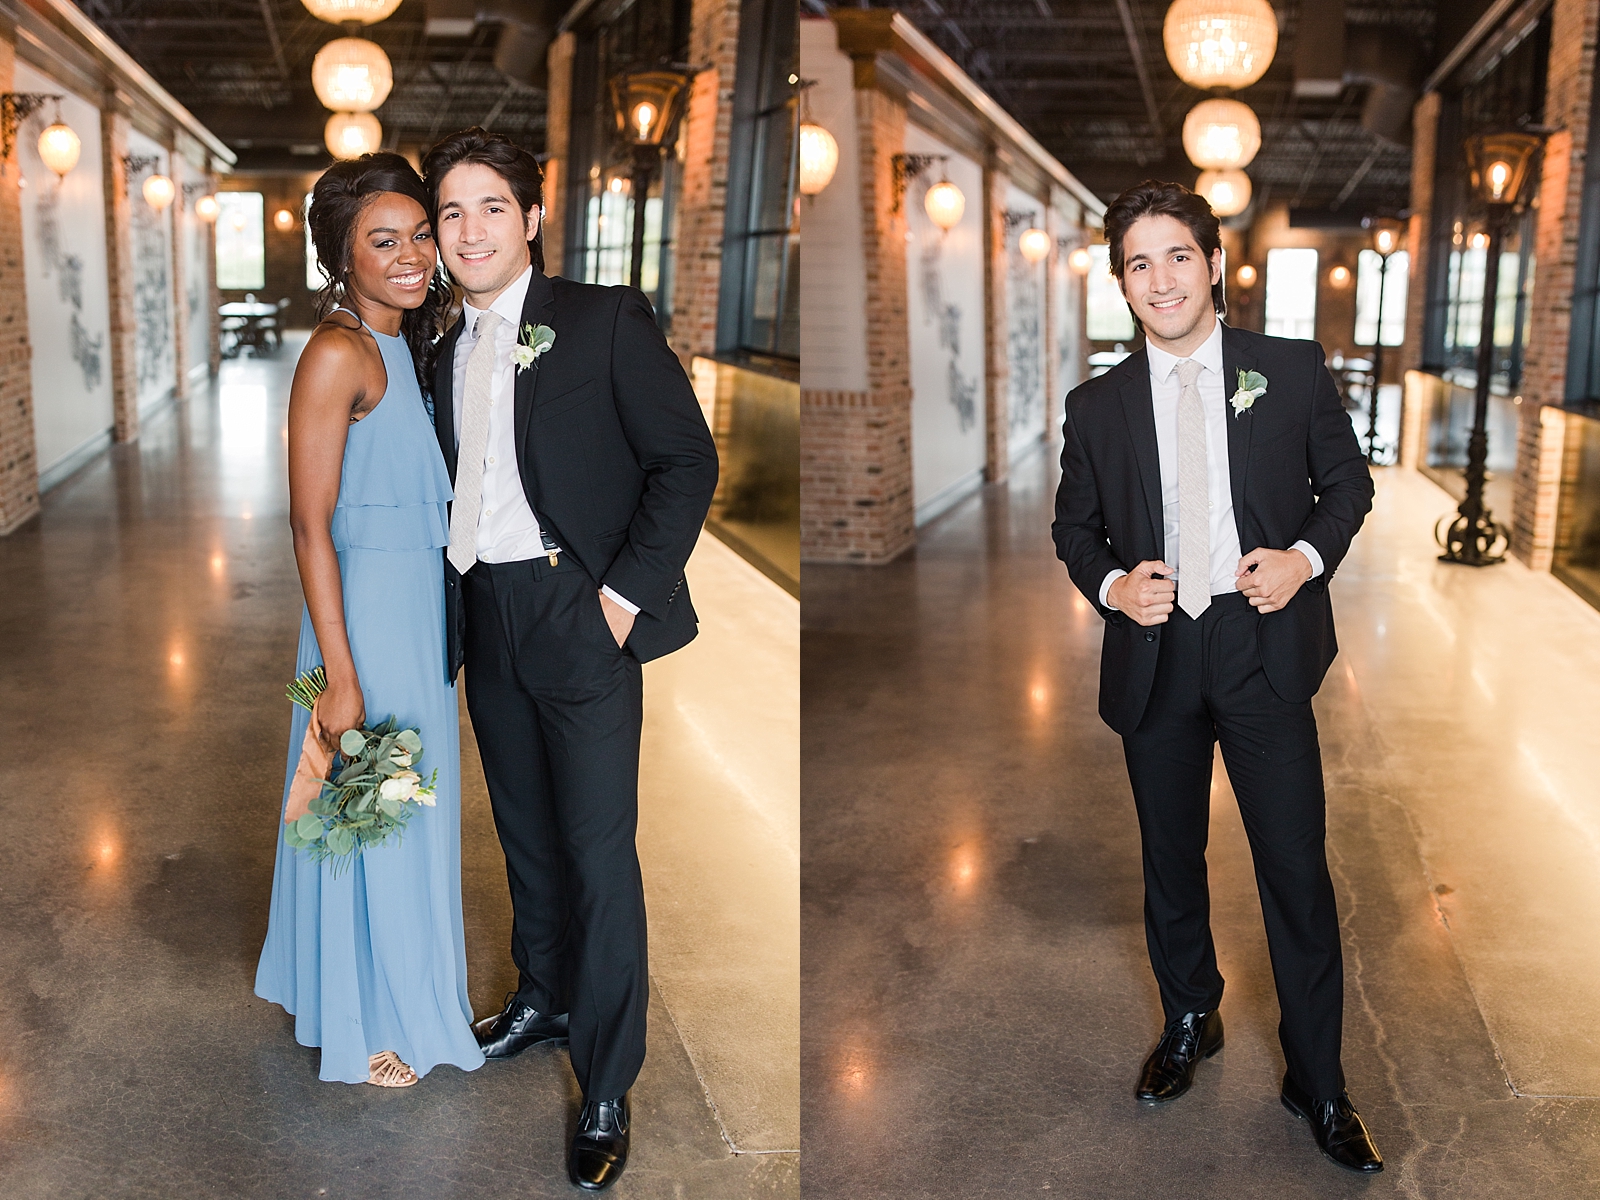 Glover Park Brewery Wedding Bridesmaid and Groomsmen hugging and groomsman by hisself Photos